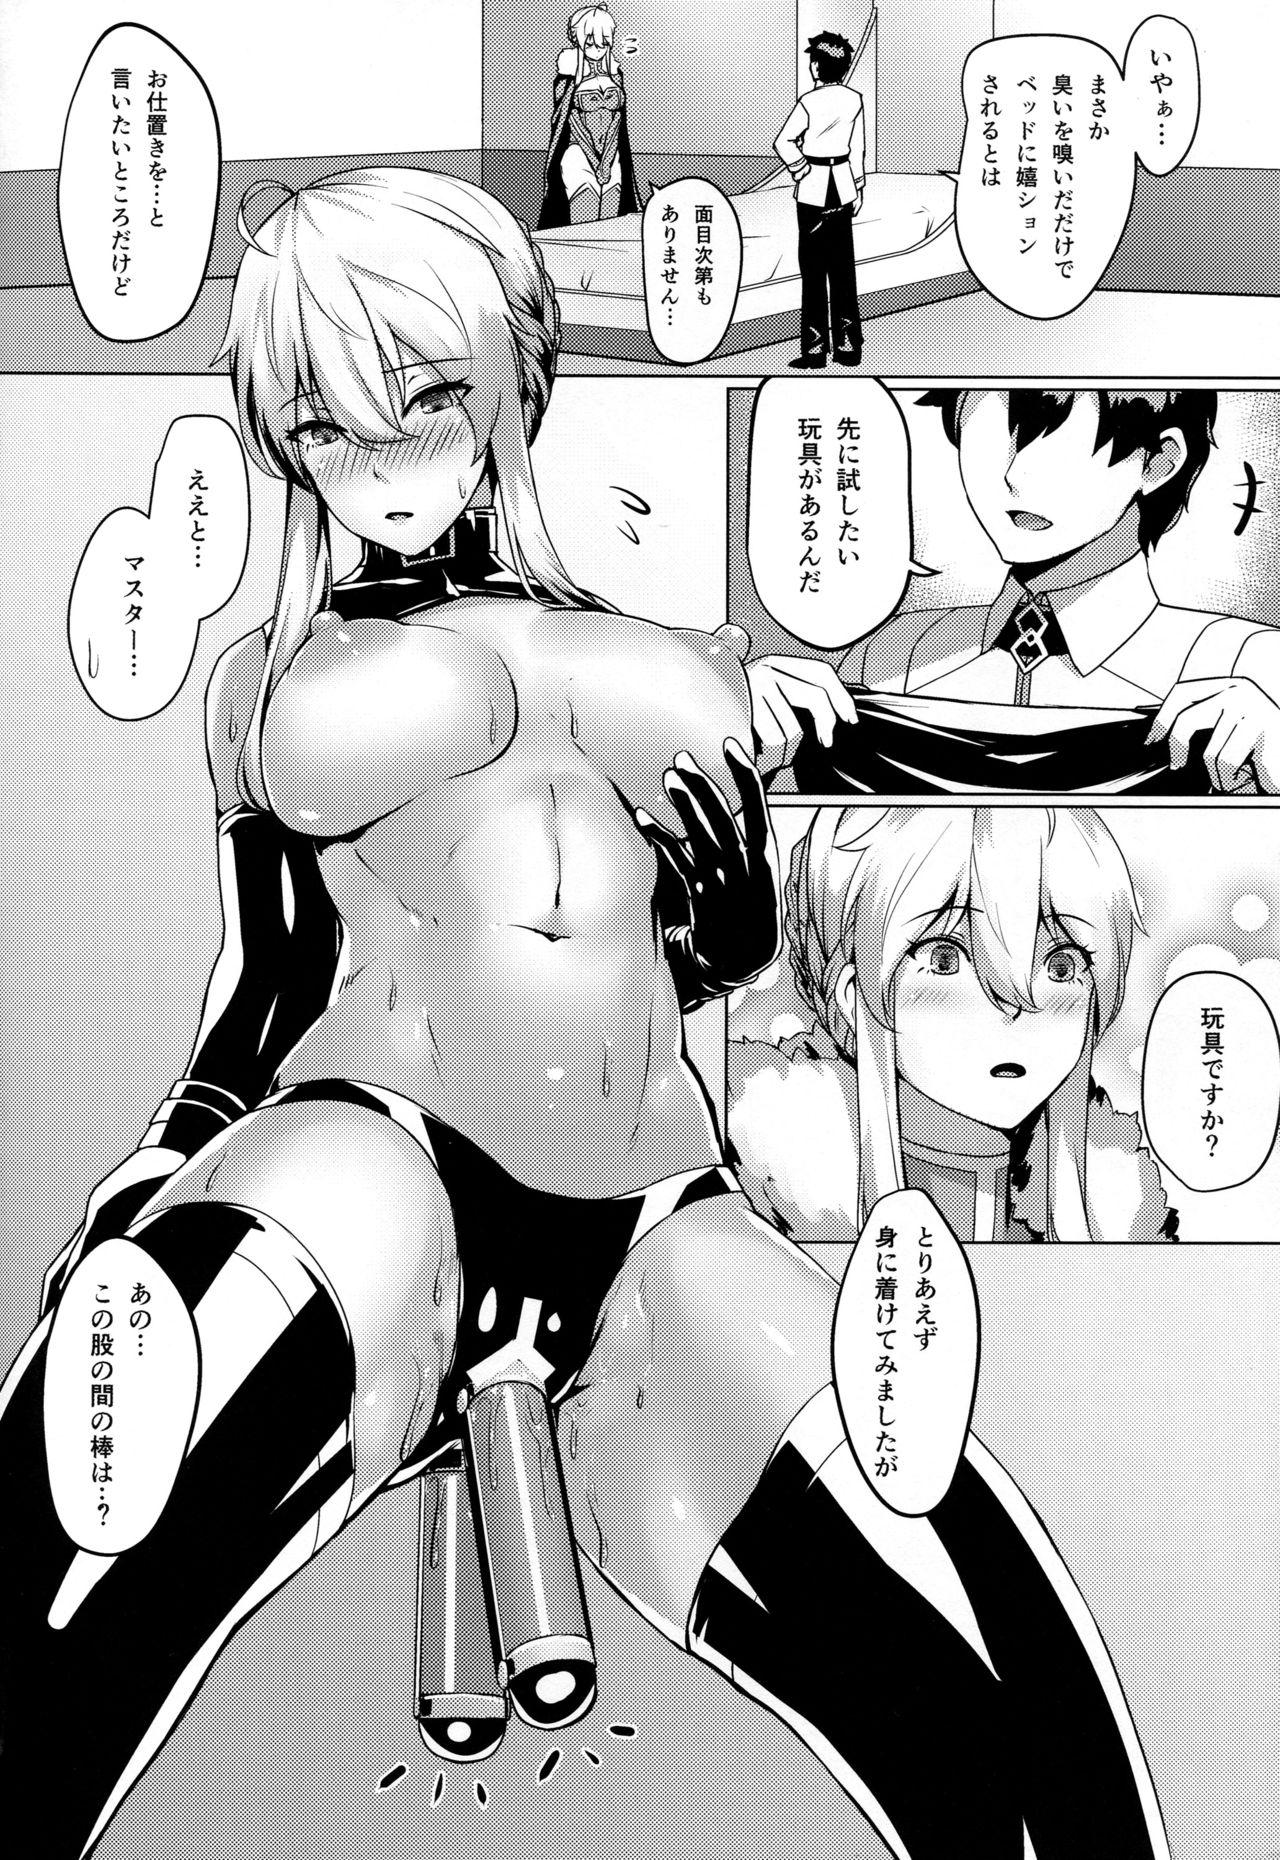 Edging Like Attracts Like - Fate grand order Strange - Page 7